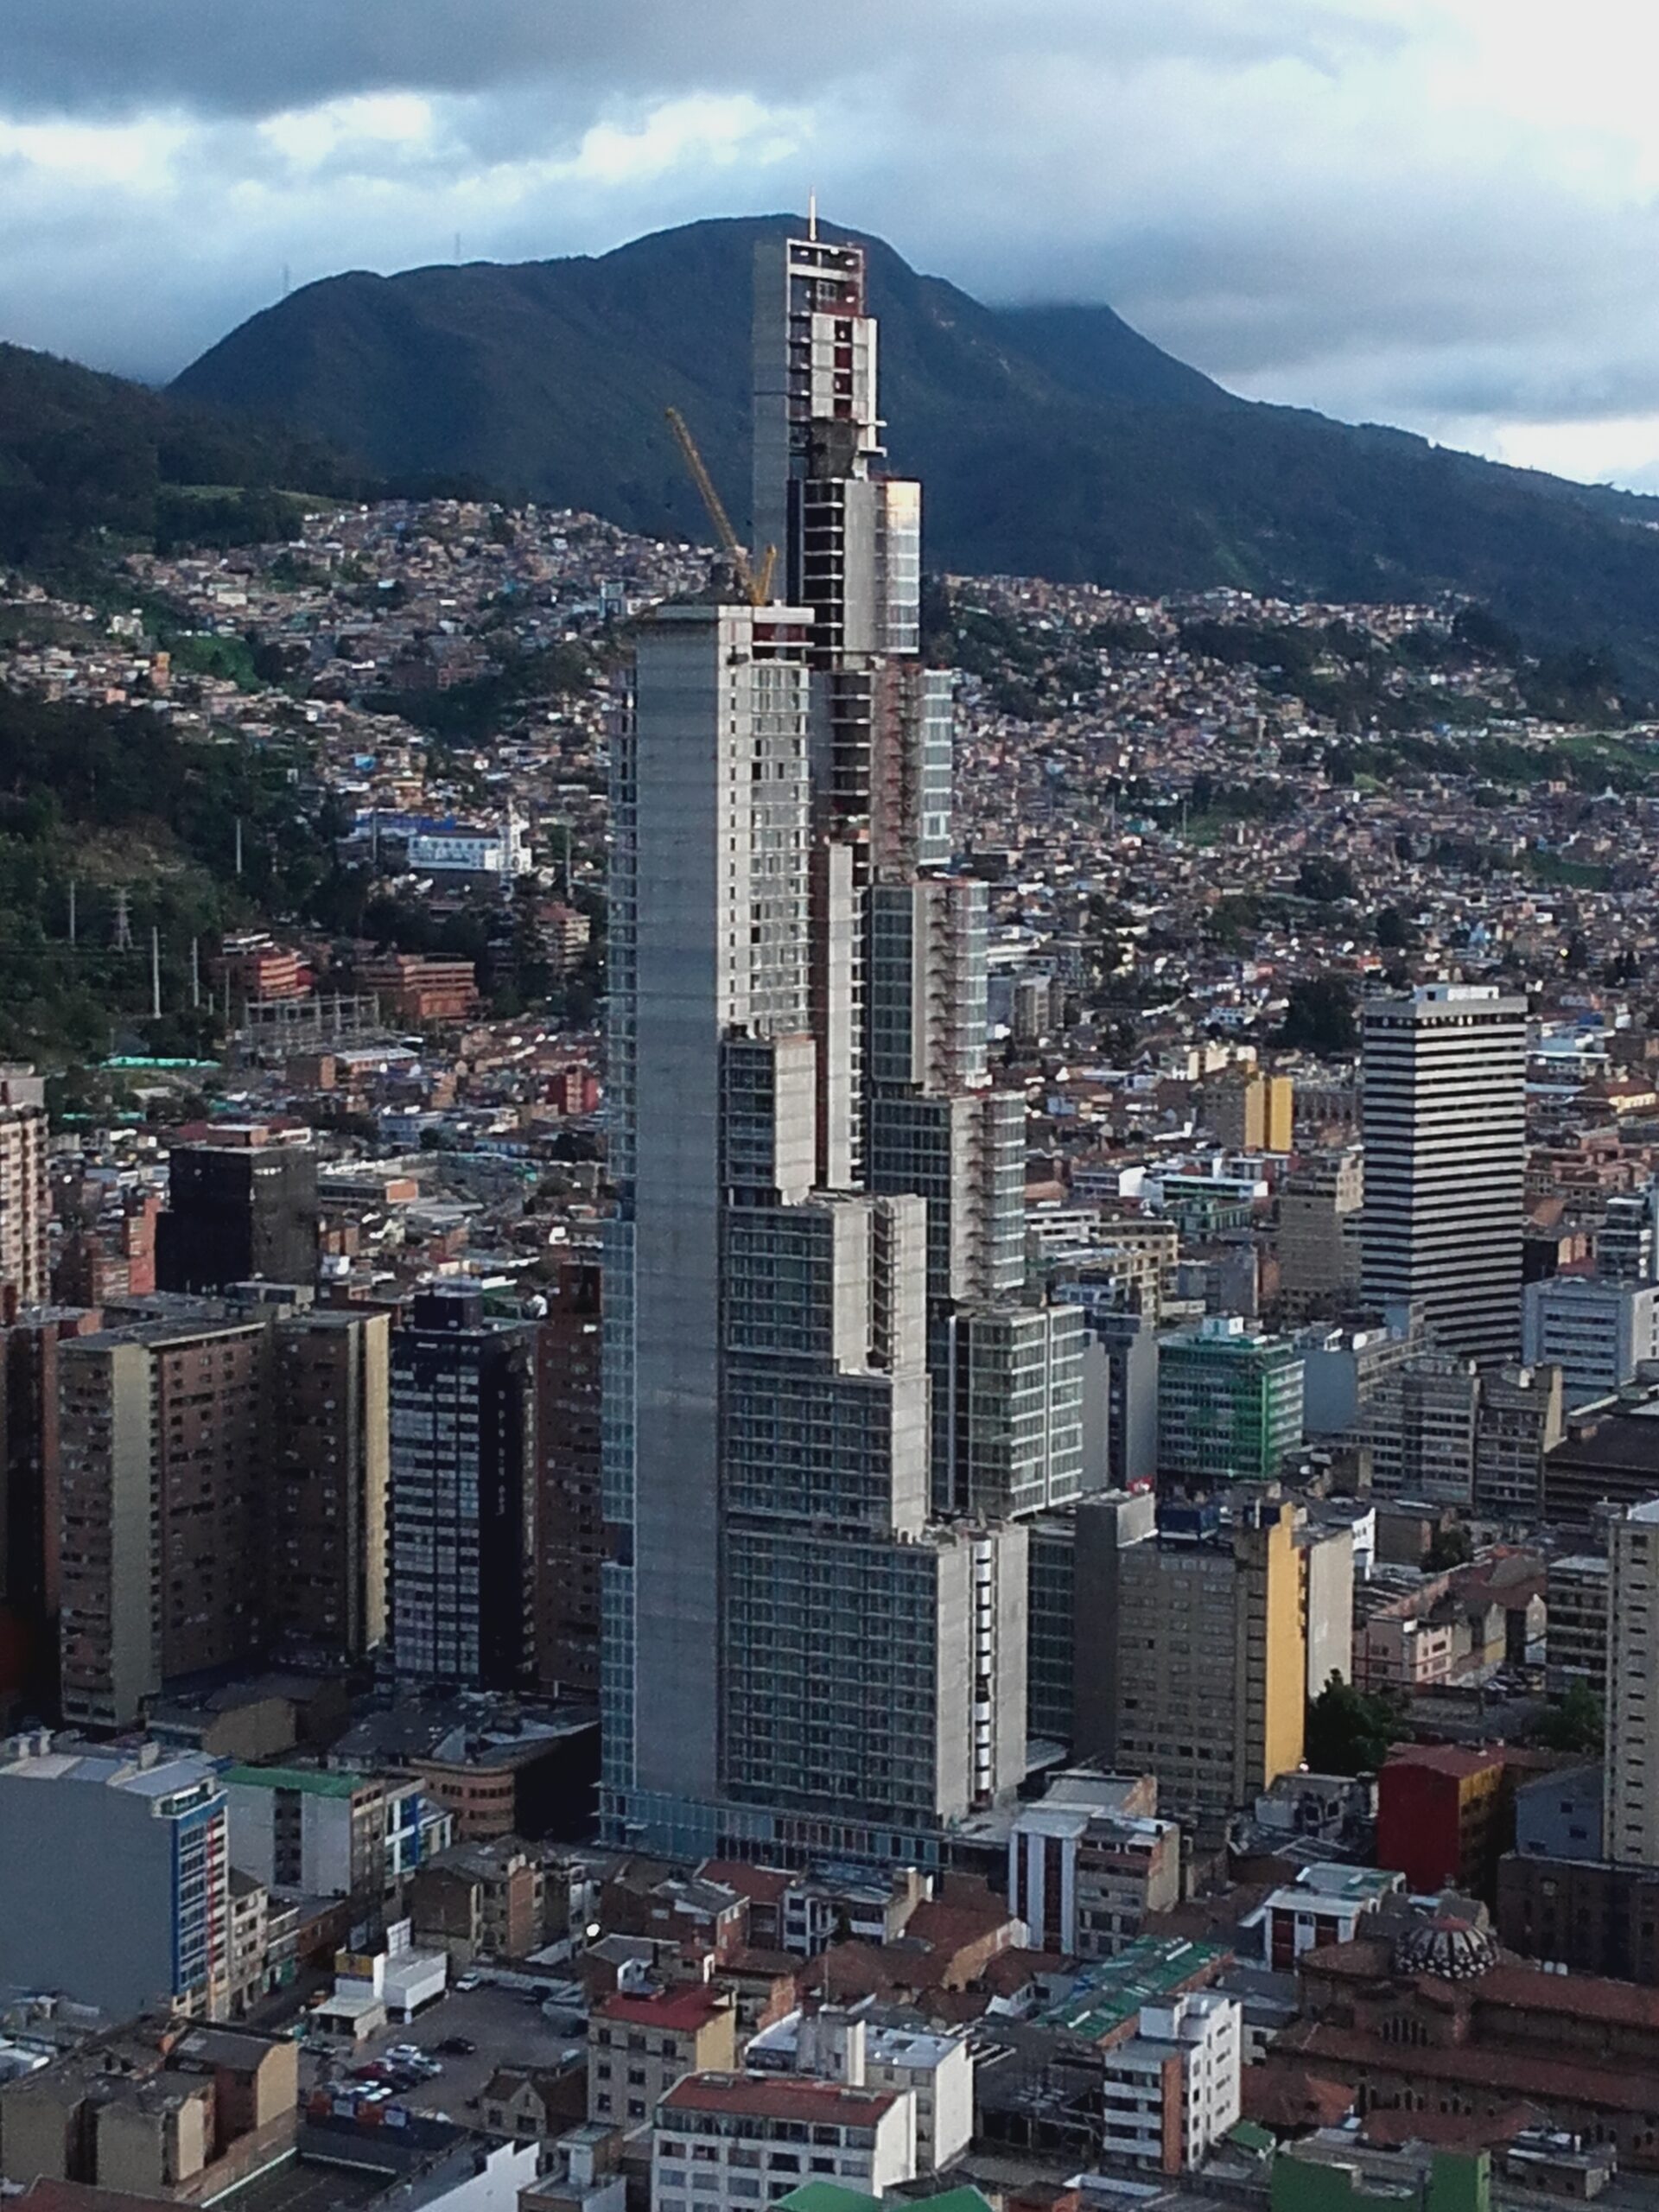 Tallest building of Colombia